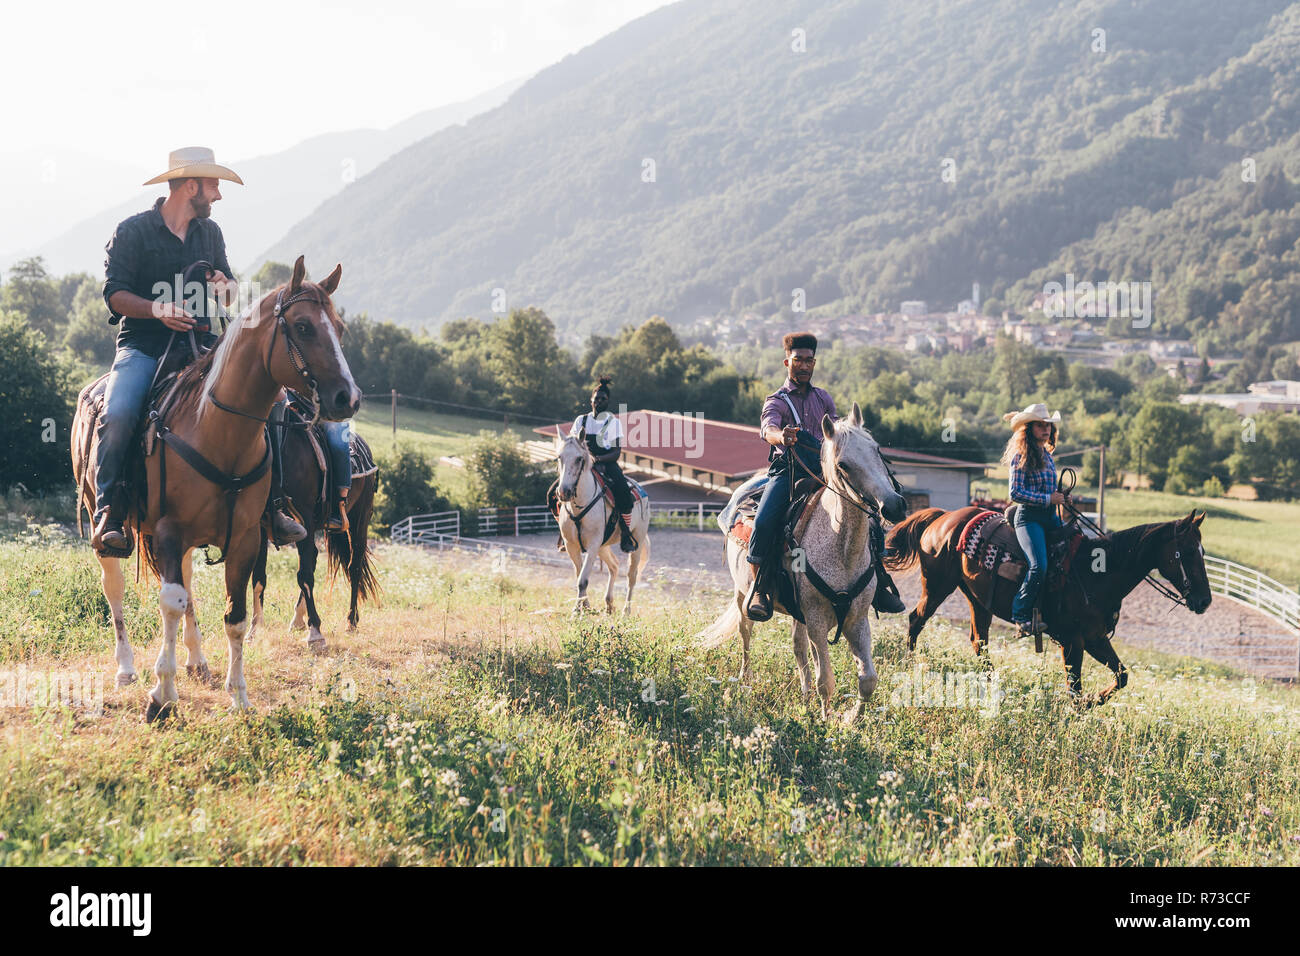 Young adults riding horses in rural landscape, Primaluna, Trentino-Alto Adige, Italy Stock Photo